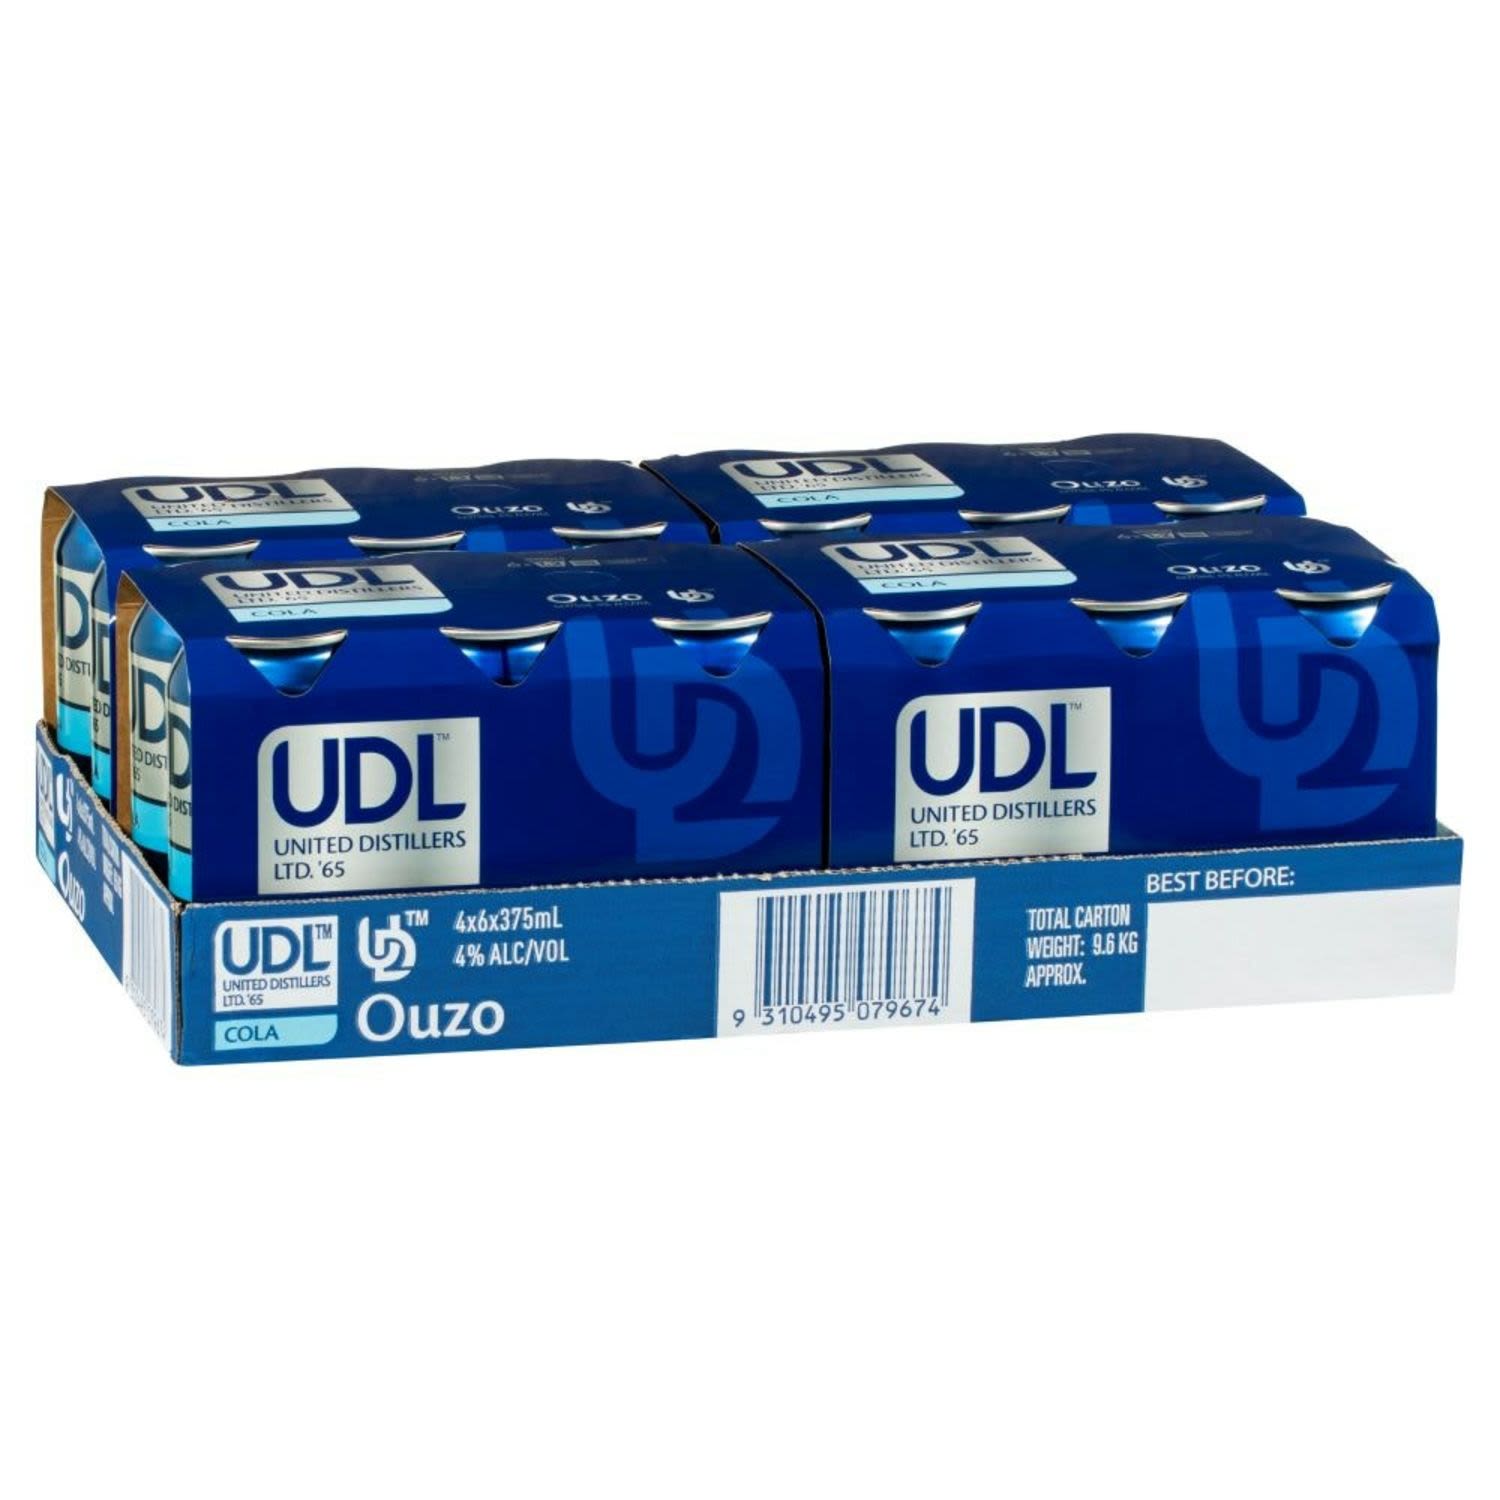 UDL Ouzo and Cola Cans 375mL<br /> <br />Alcohol Volume: 4.00%<br /><br />Pack Format: 24 Pack<br /><br />Standard Drinks: 1.3<br /><br />Pack Type: Can<br />